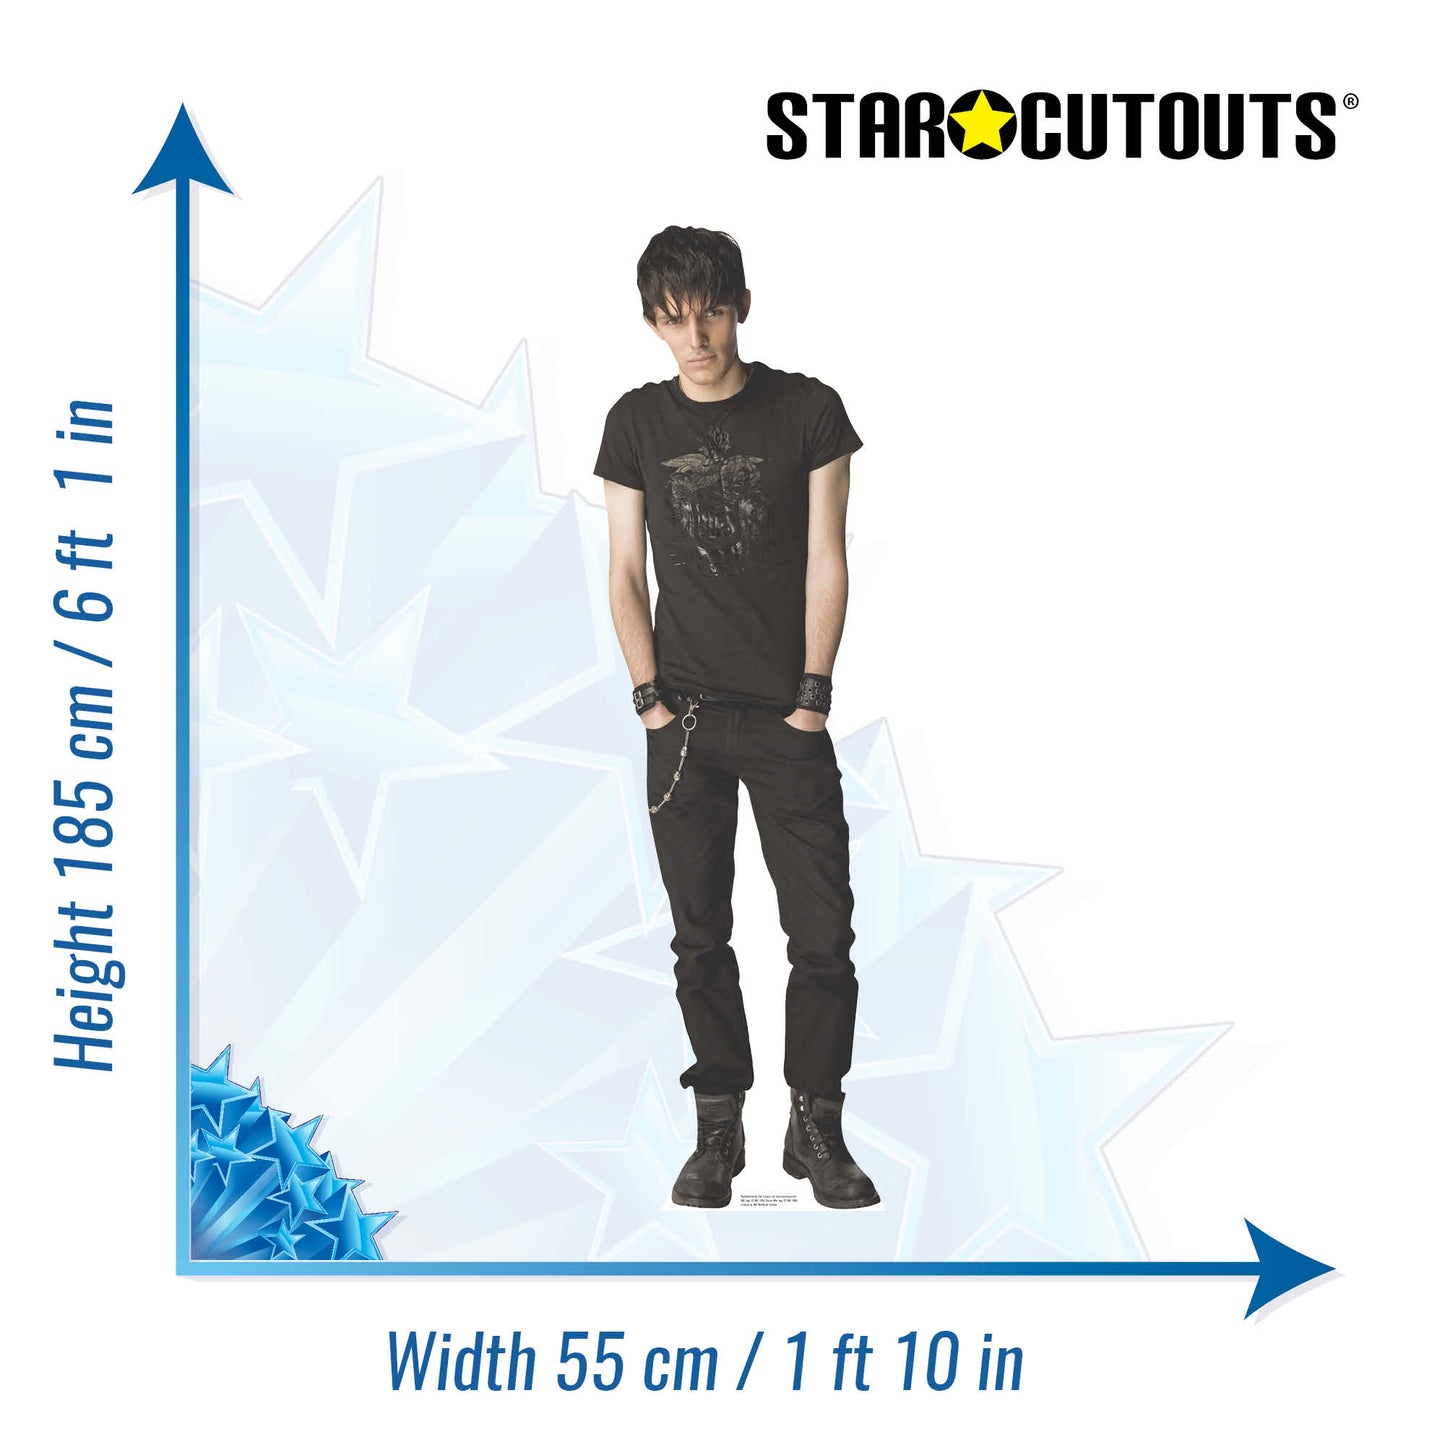 Jethro - Dr Who Cardboard Cut Out Height 185cm - Star Cutouts